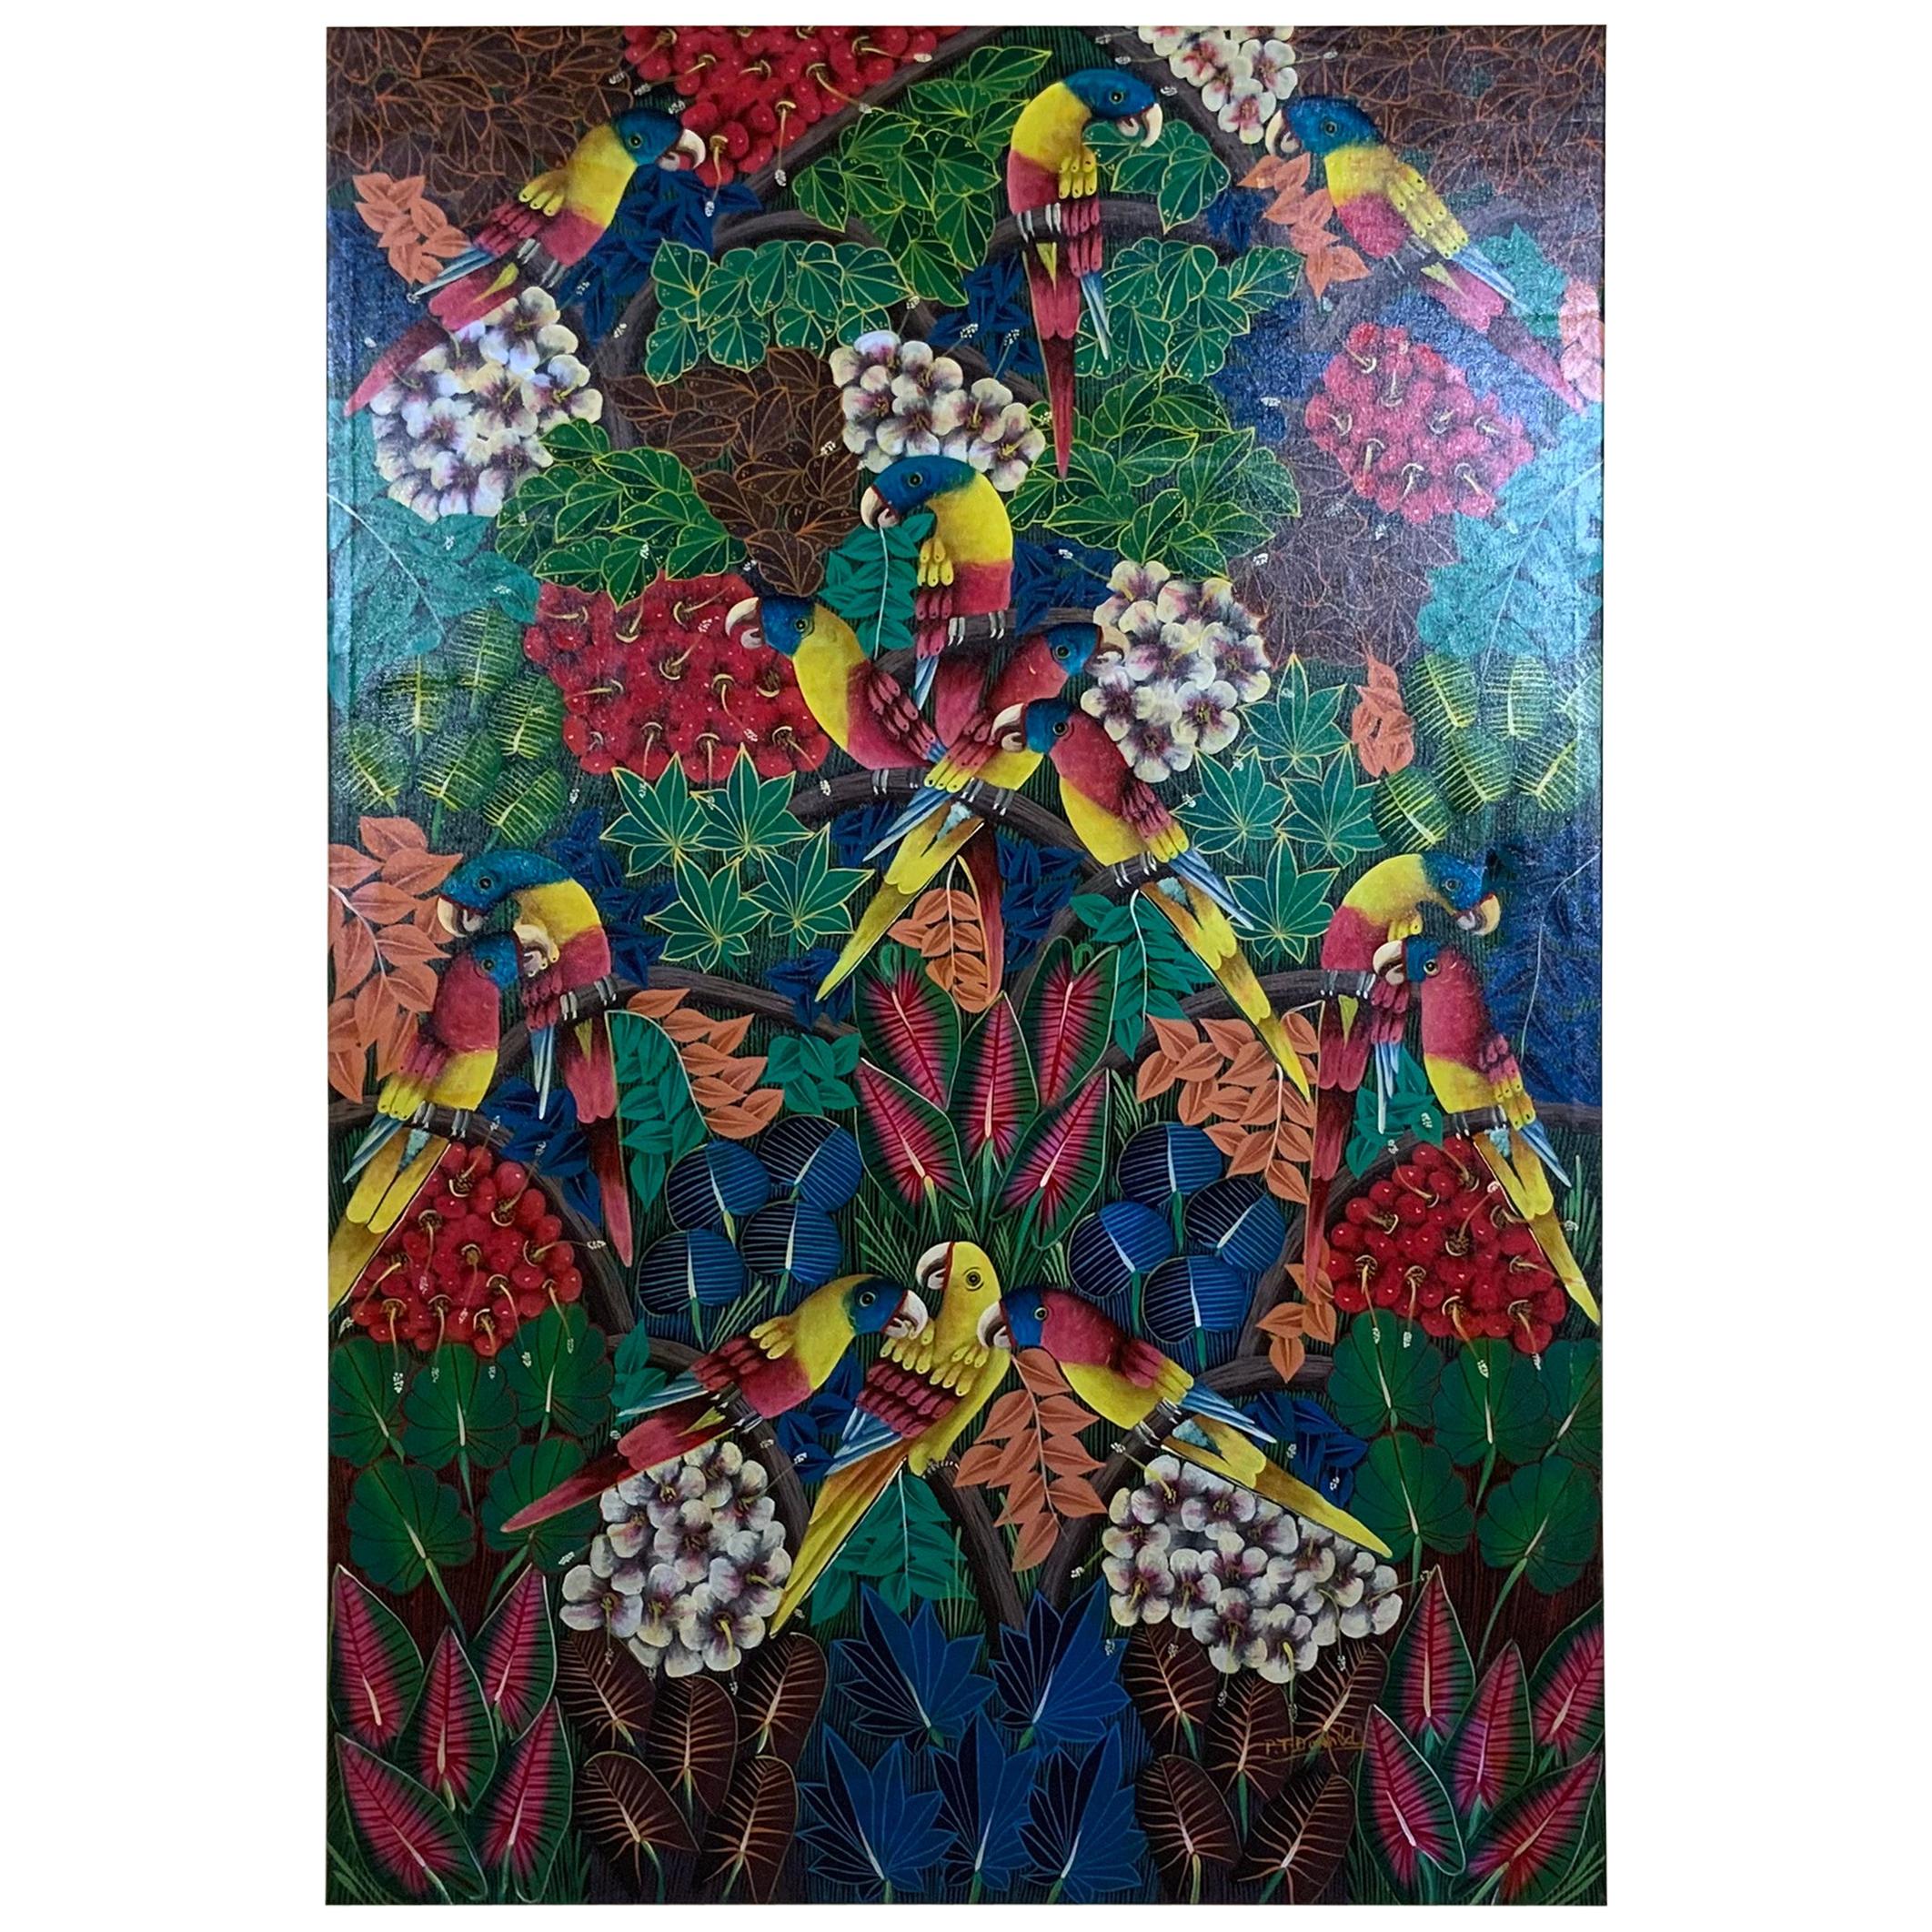 Large Parrots in the Jungle, Haitian Acrylic Painting on Canvas